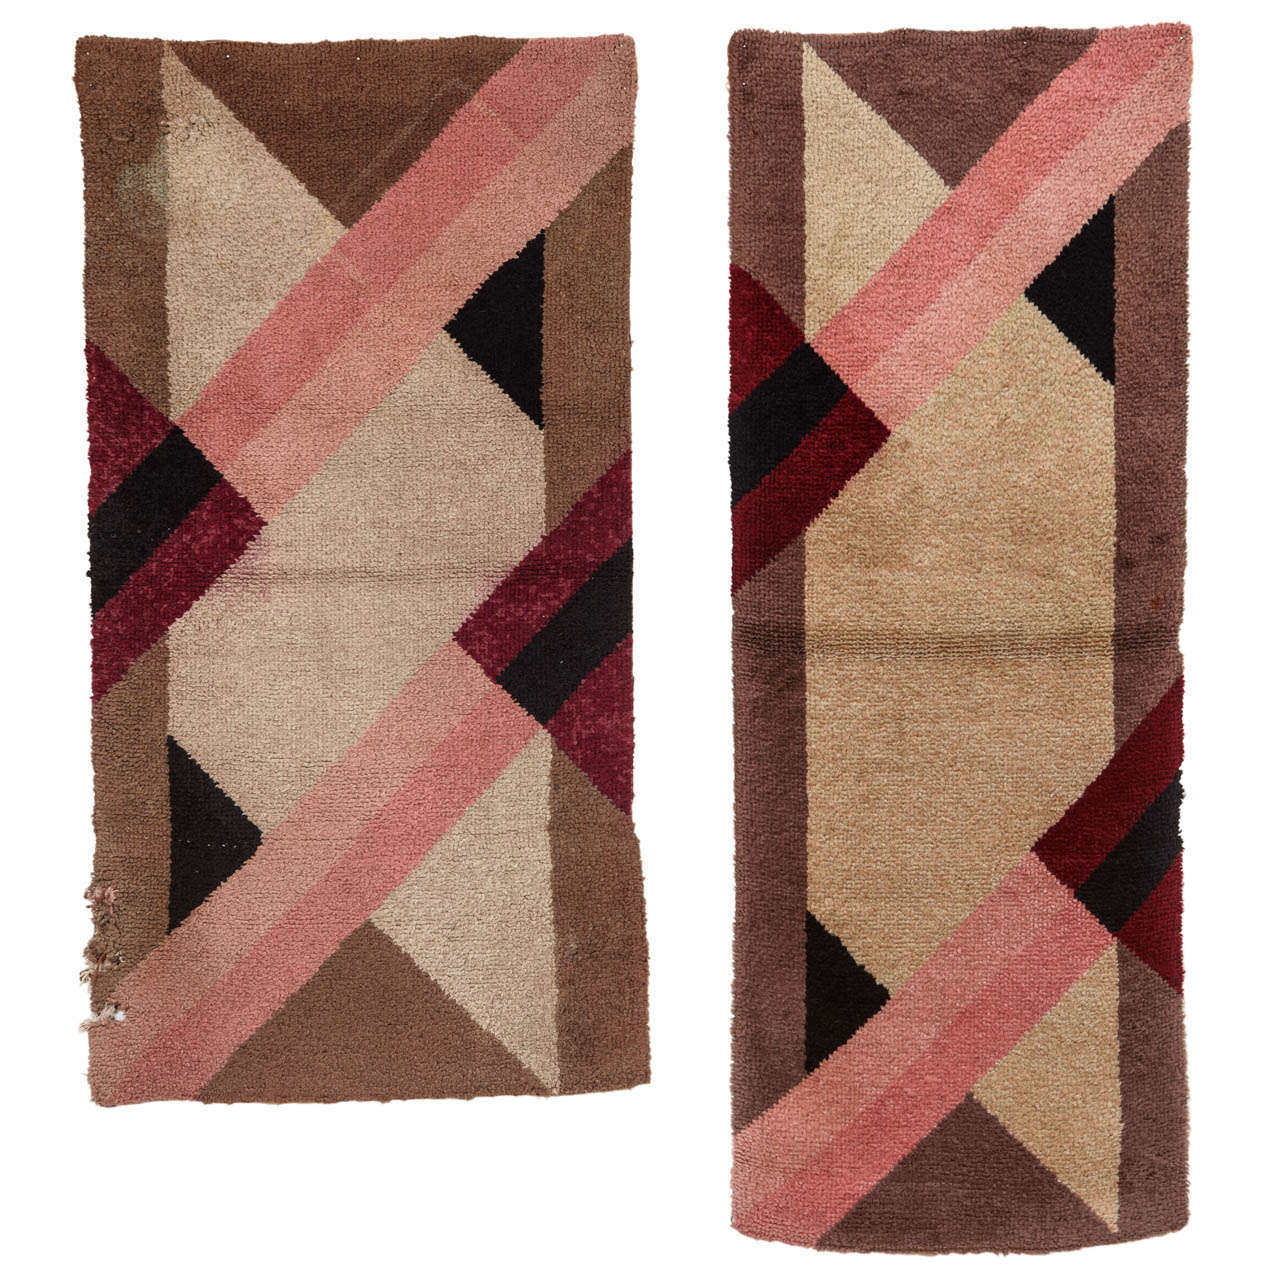 Pair of French Art Deco Rugs 1930's